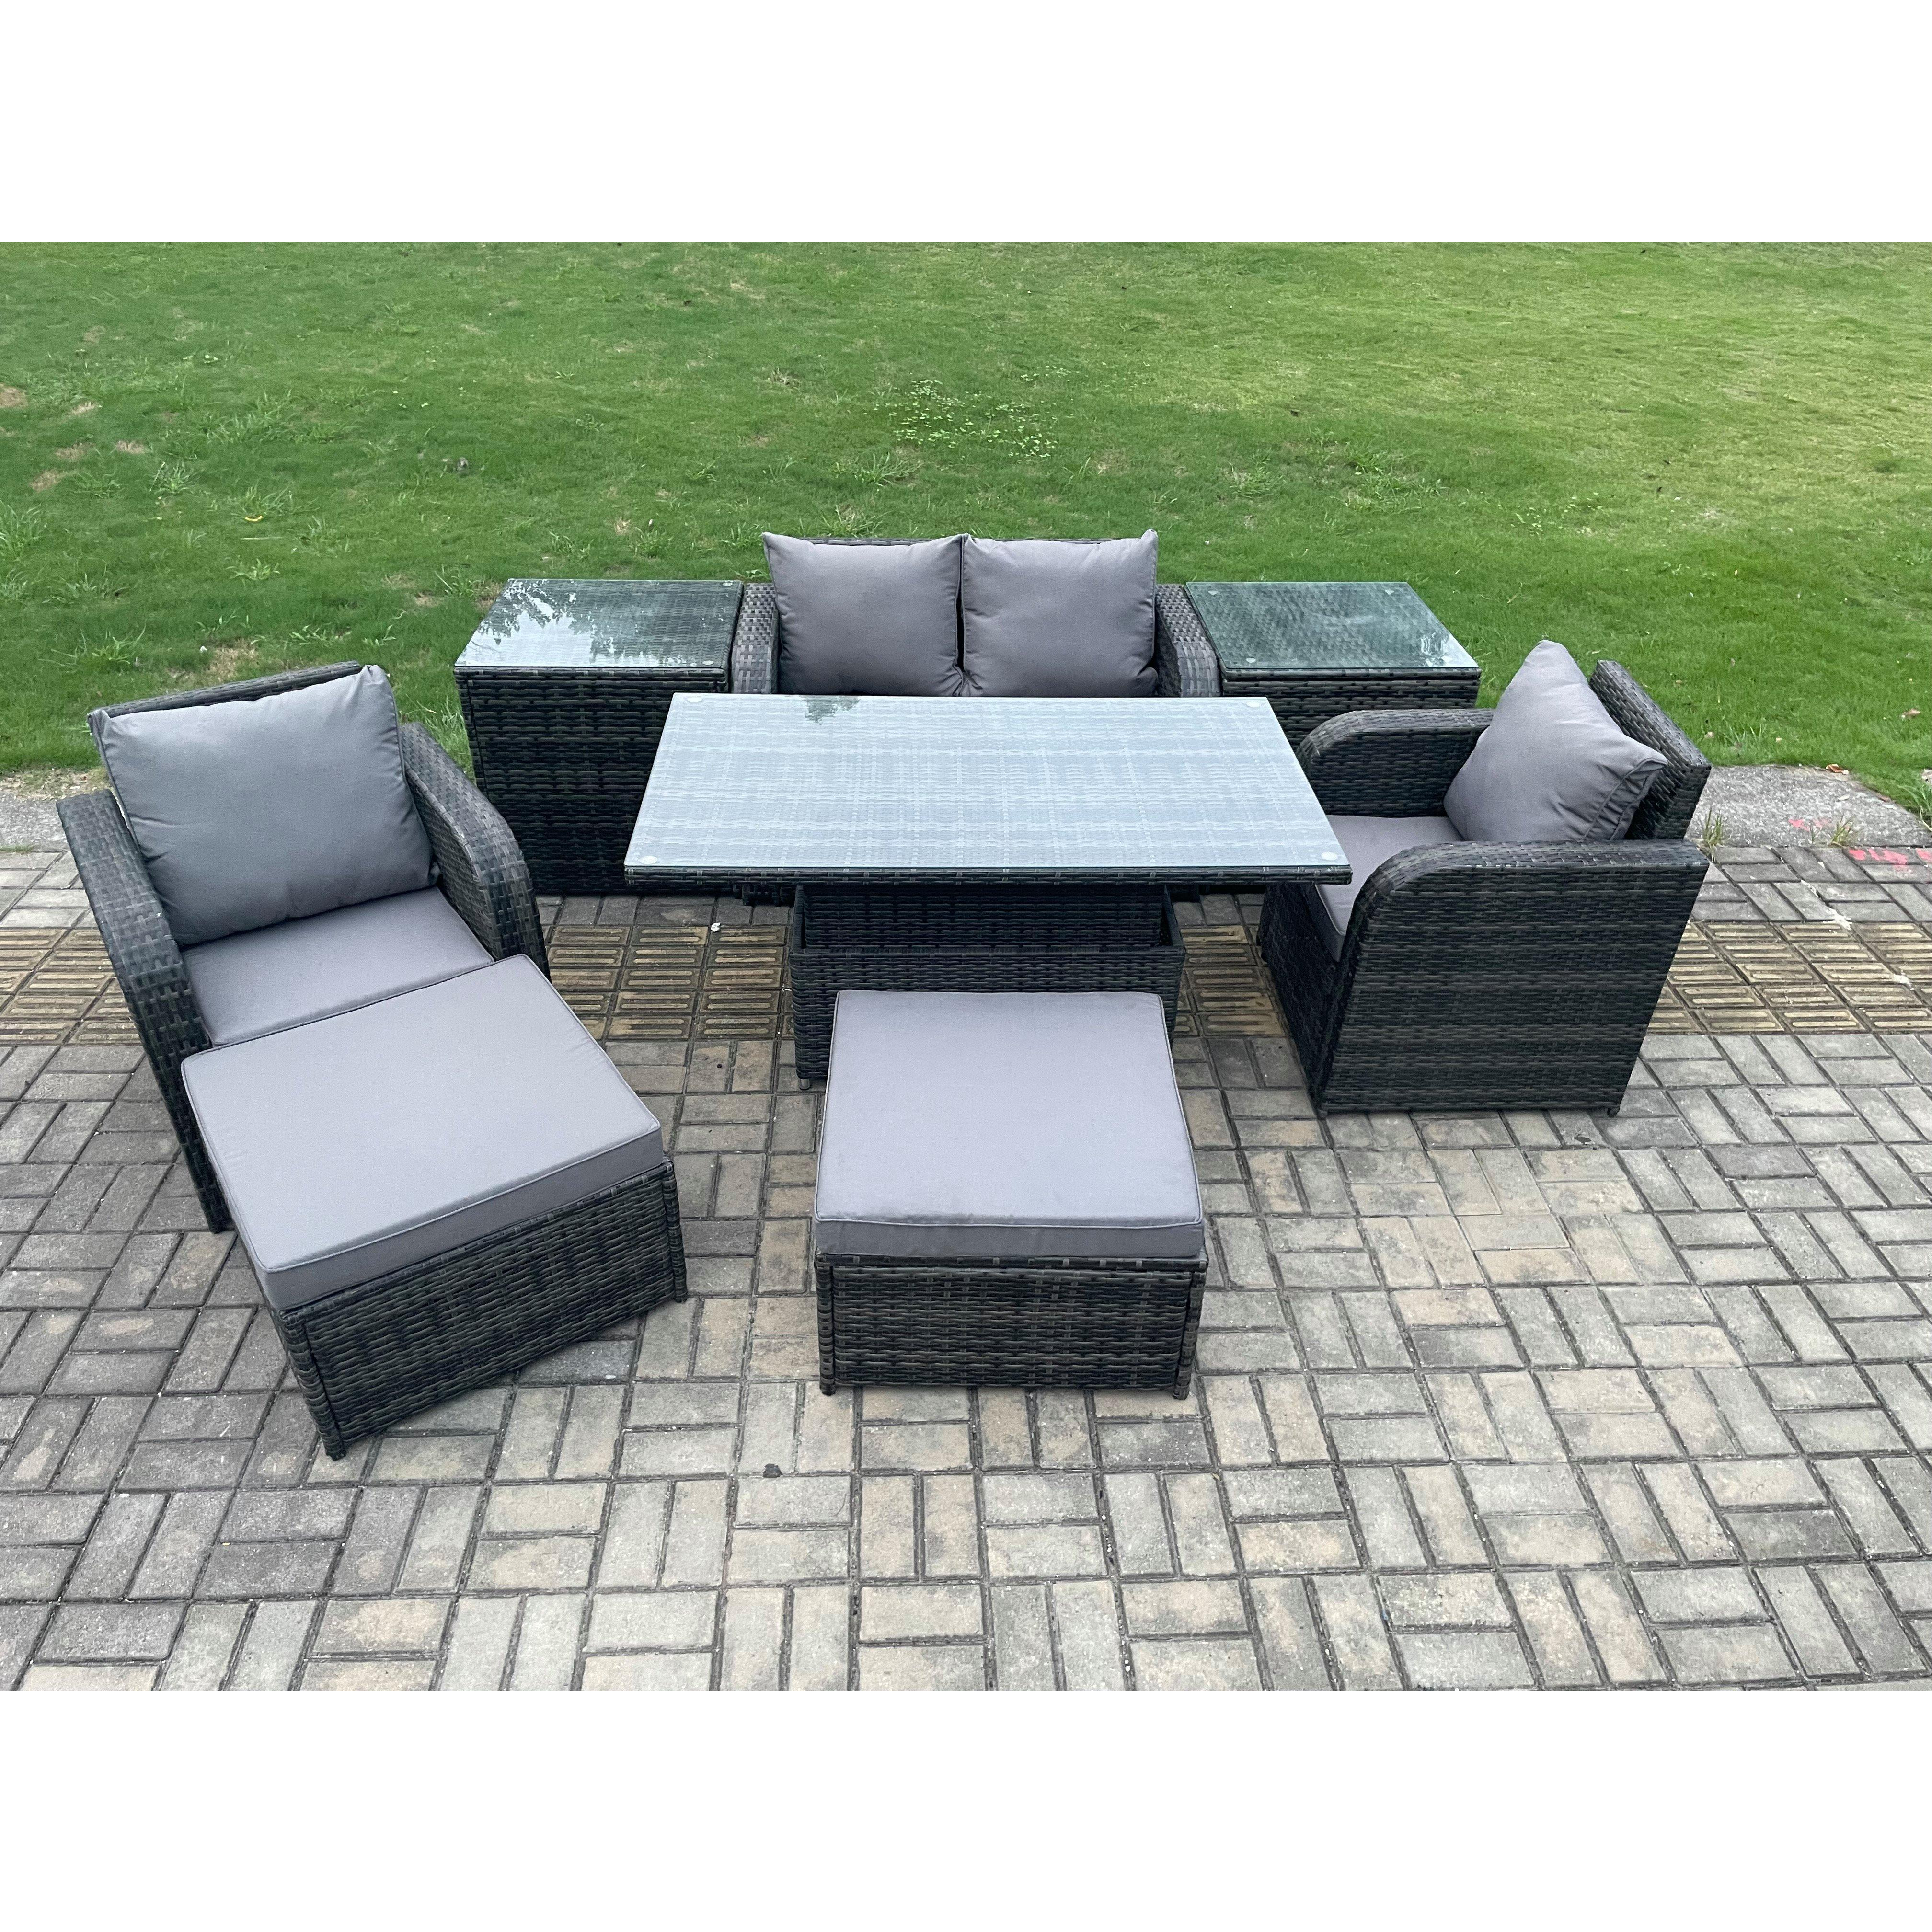 Rattan Furniture Outdoor Garden Dining Sets Patio Height Adjustable Rising lifting Table Love Sofa With Stools - image 1